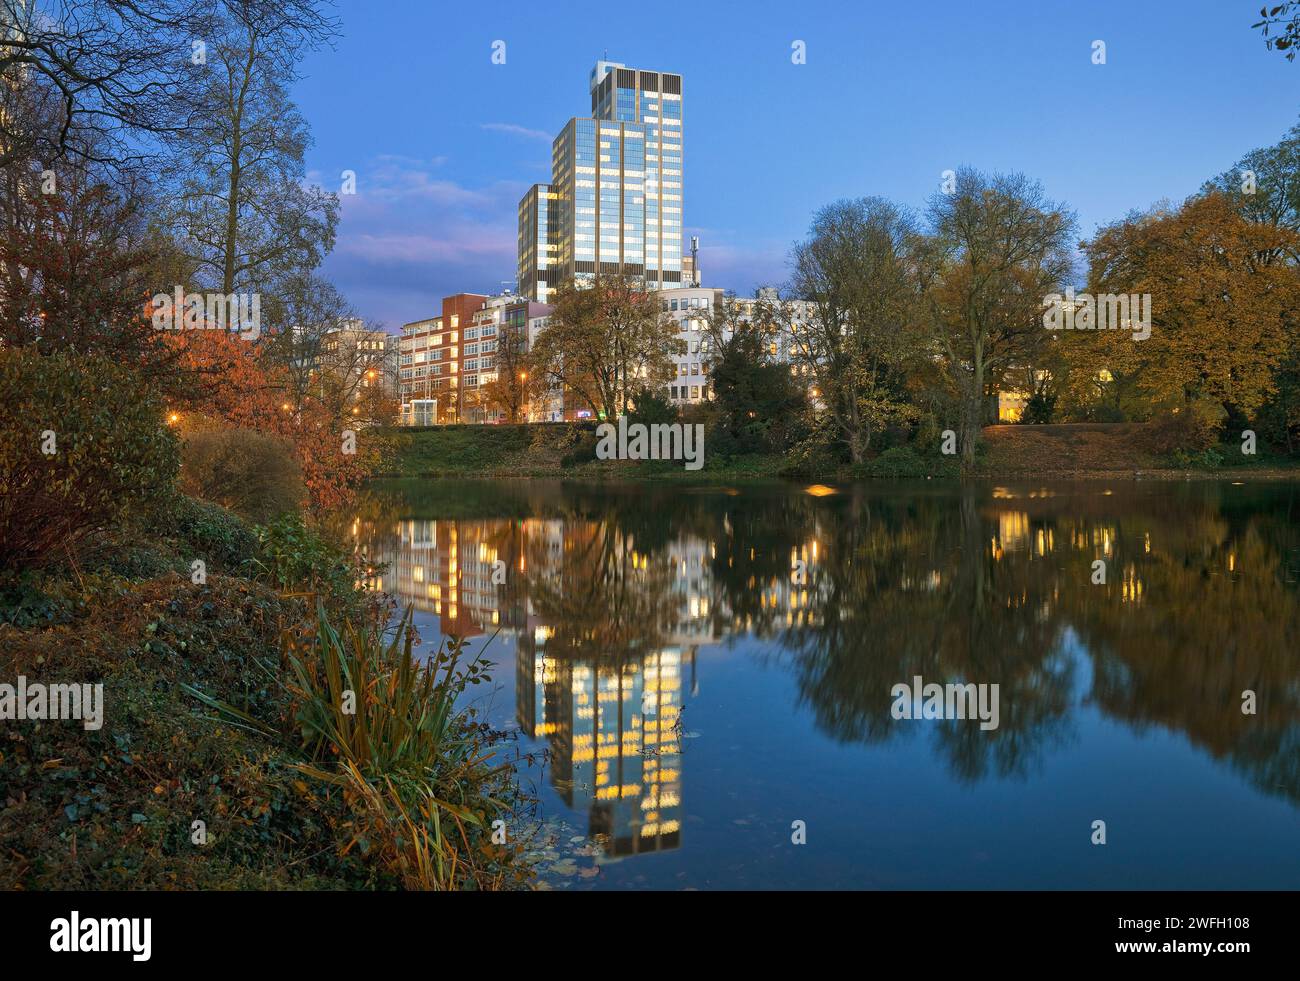 LVA main building reflected in pond Kaiserteich in the fall in the evening, Germany, North Rhine-Westphalia, Lower Rhine, Dusseldorf Stock Photo